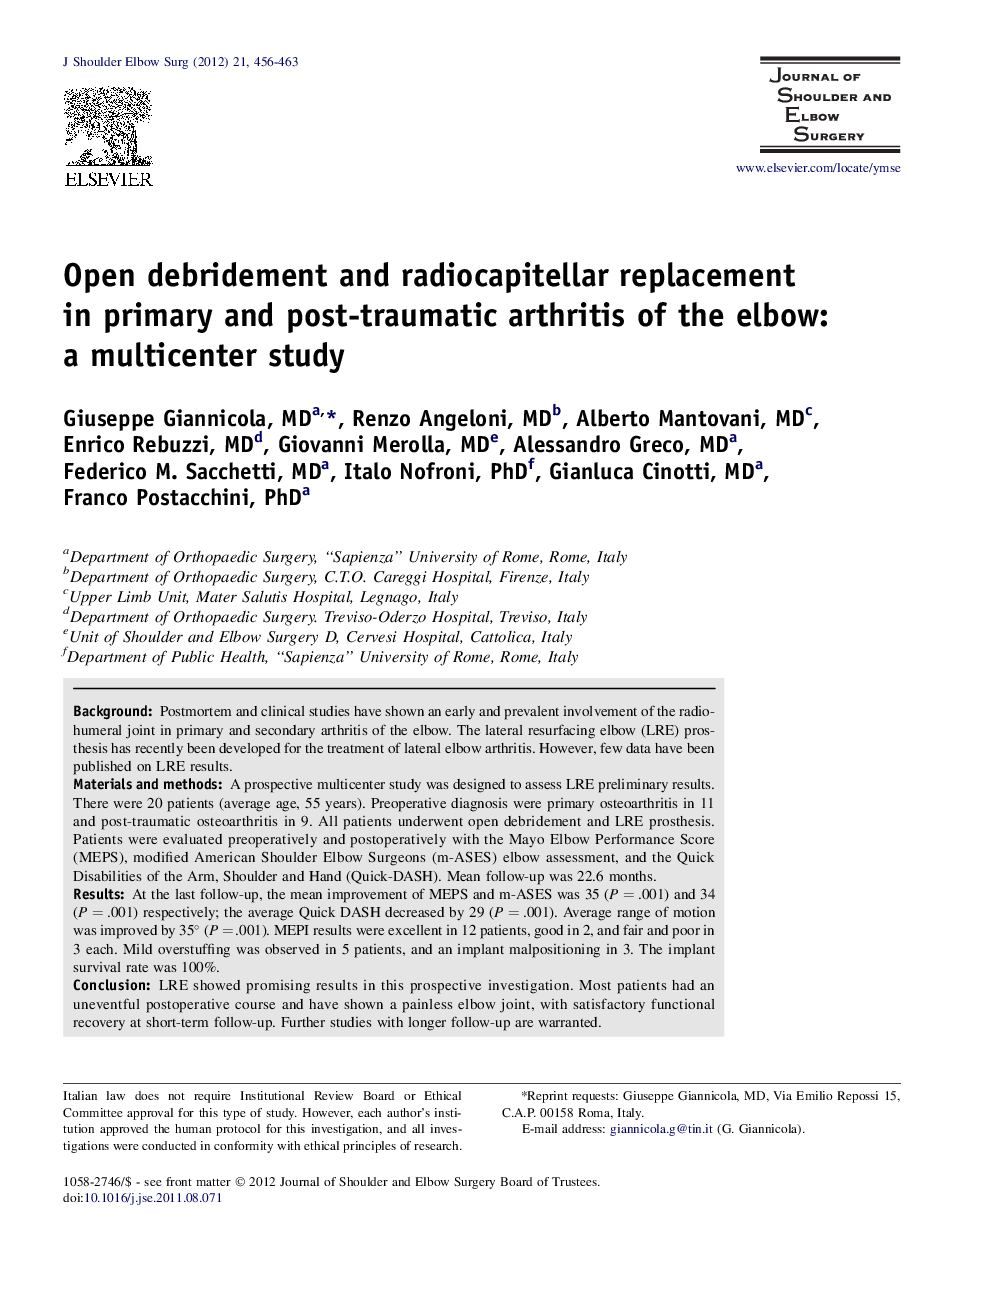 Open debridement and radiocapitellar replacement in primary and post-traumatic arthritis of the elbow: a multicenter study 